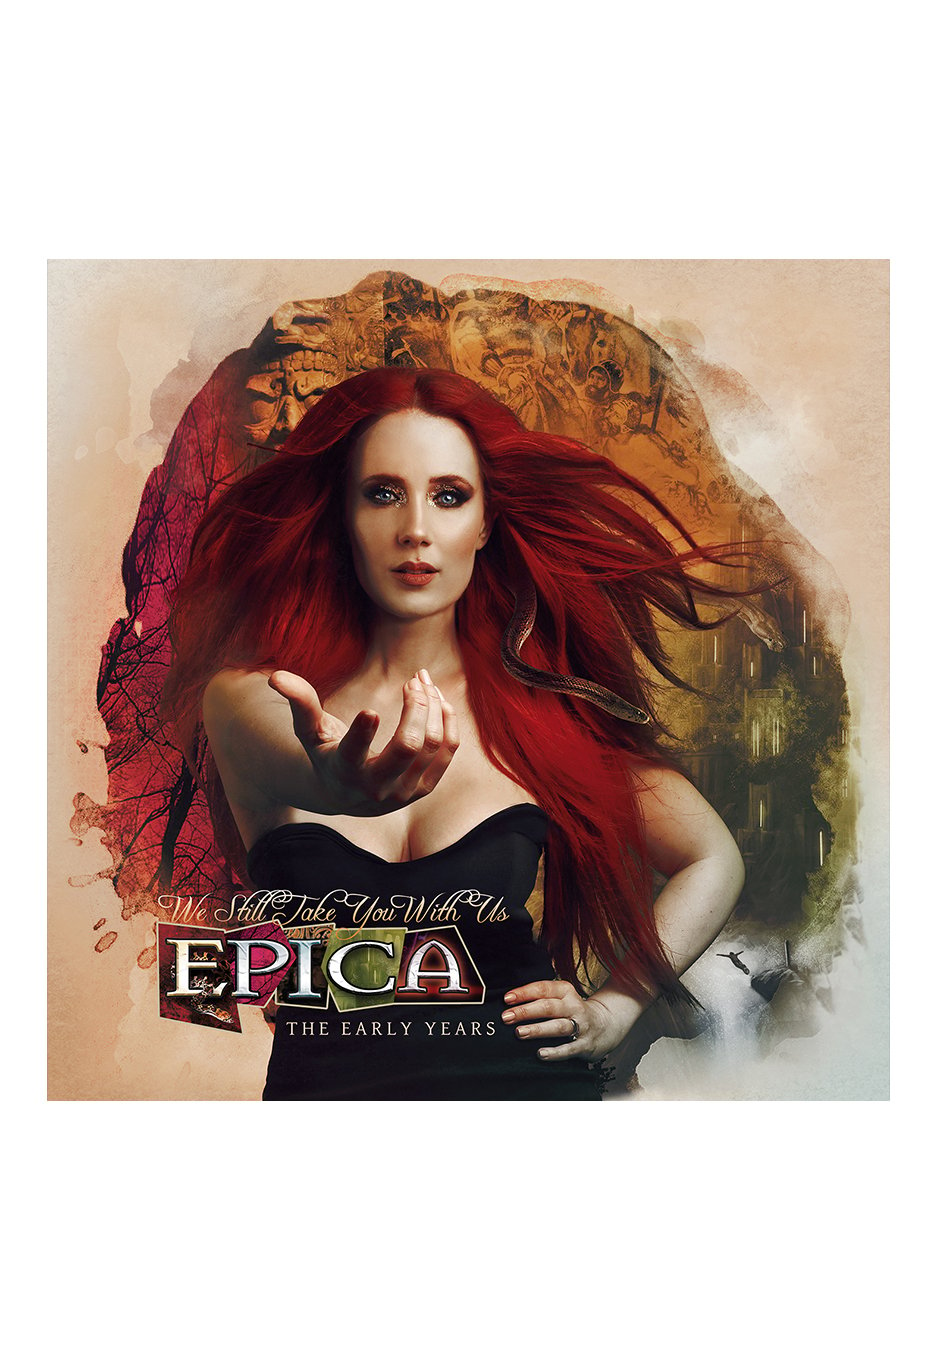 Epica - We Still Take You With Us: The Early Years Ltd. Earbook 6 CD + Blu Ray + DVD